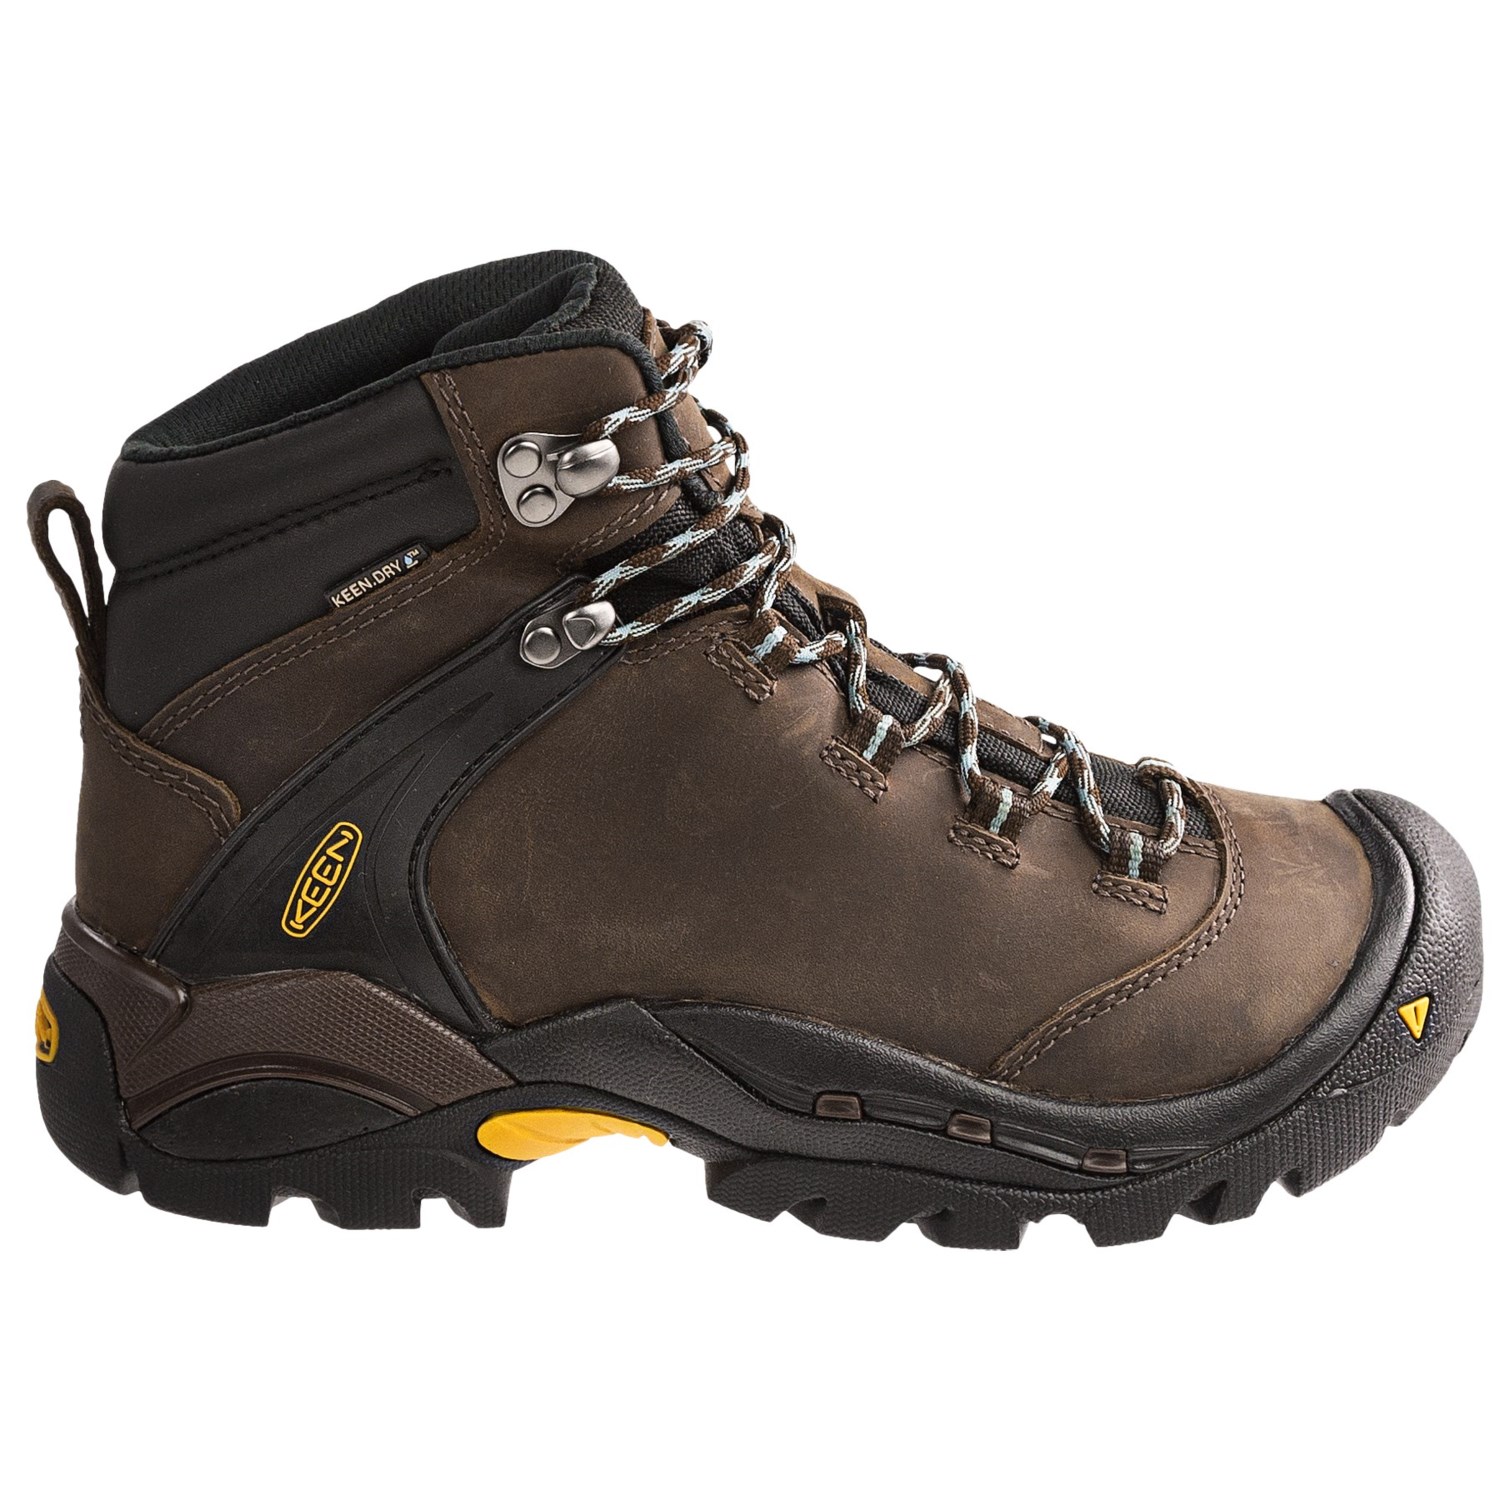 Keen Ketchum Leather Hiking Boots (For Women) 6741N - Save 25%